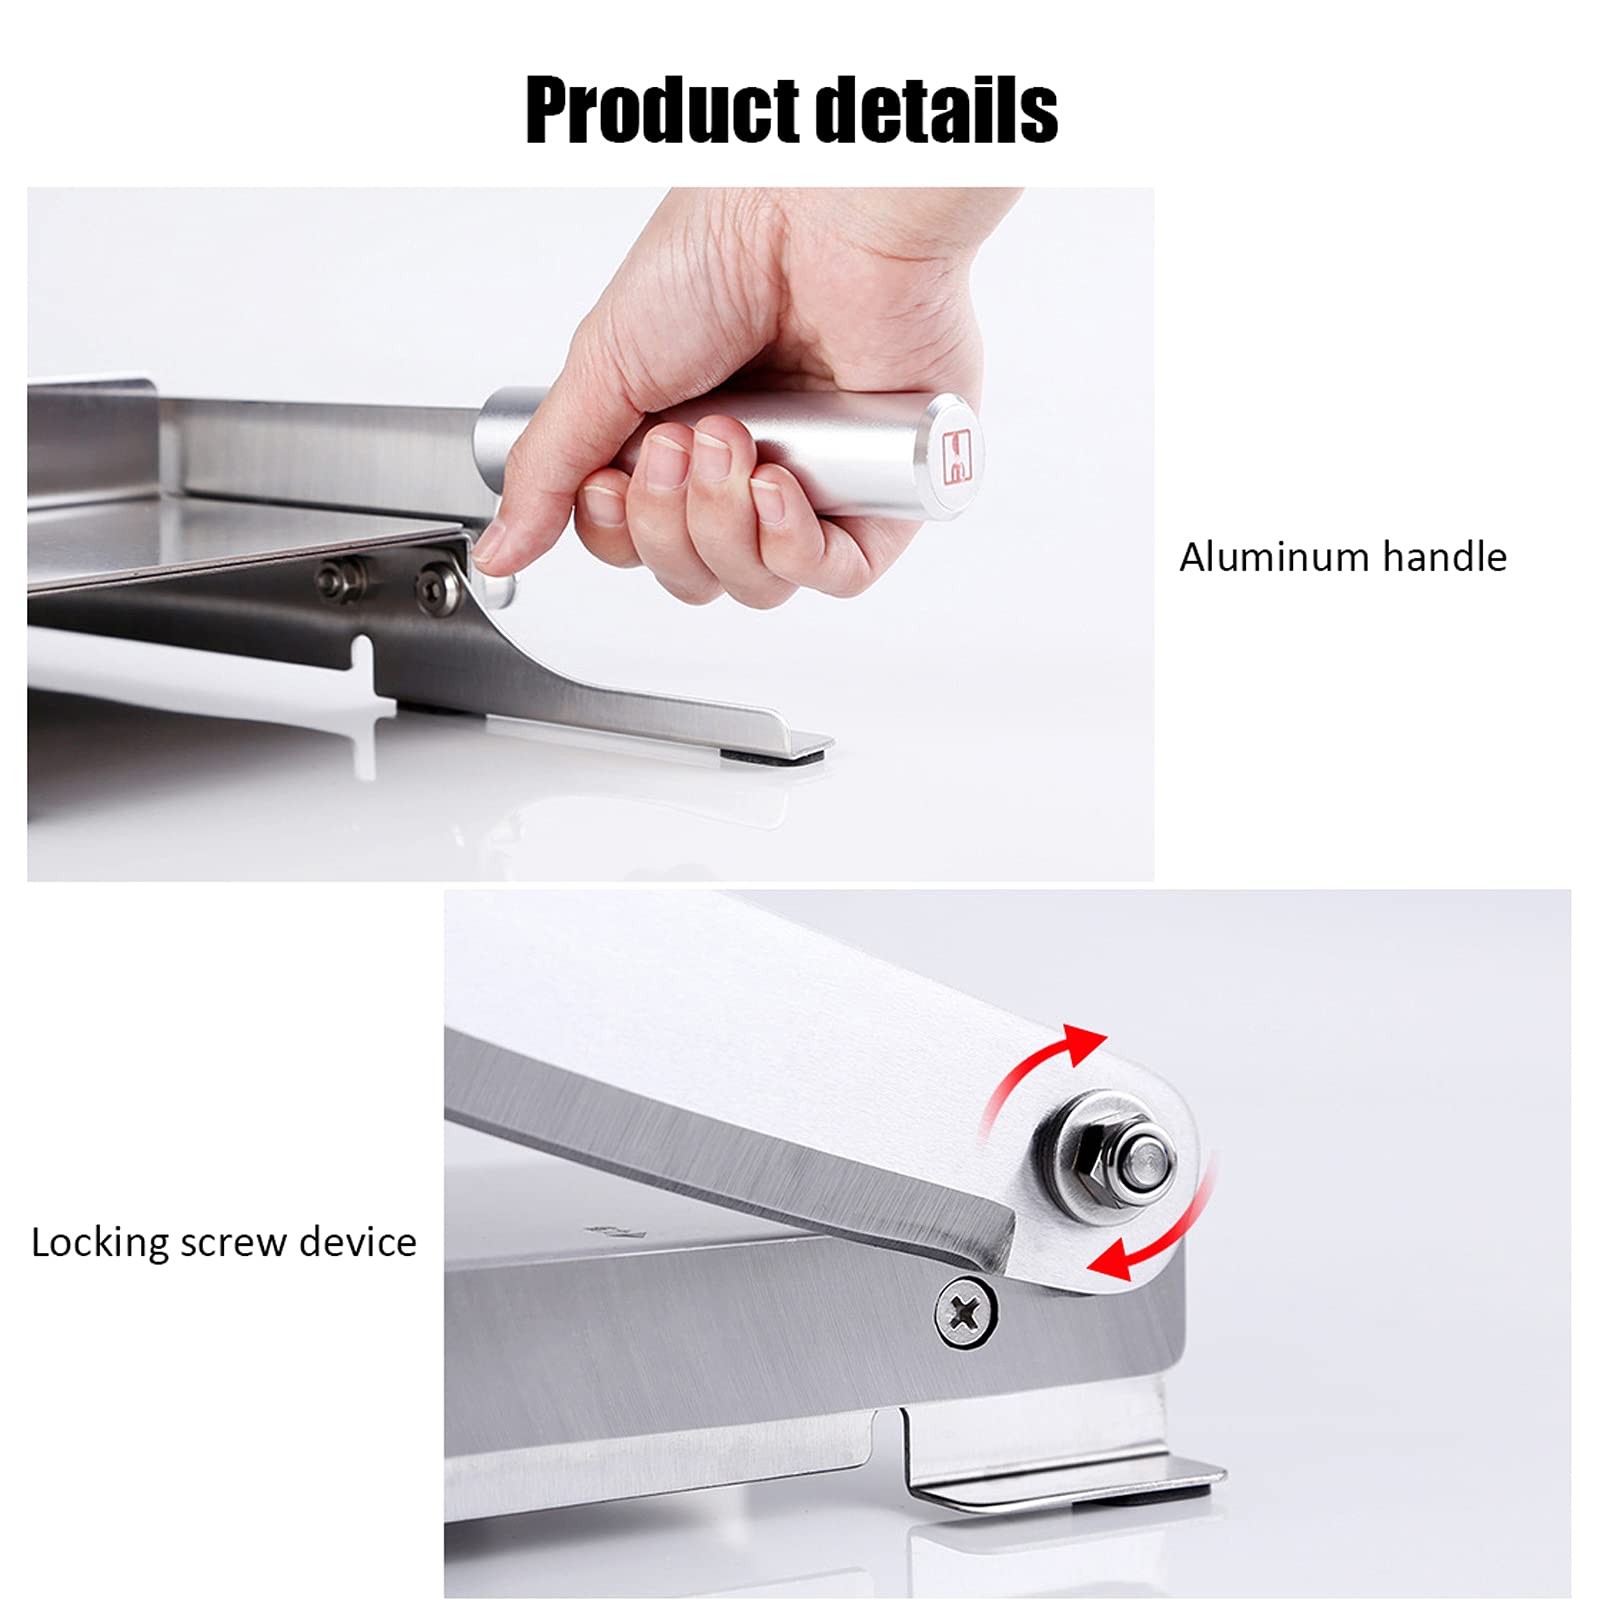 Wgwioo Frozen Meat Slicer, Manual Vegetable Cutting Machine, Stainless Steel Meat Cutter, Beef Mutton Roll Meat Cheese Food Slicer